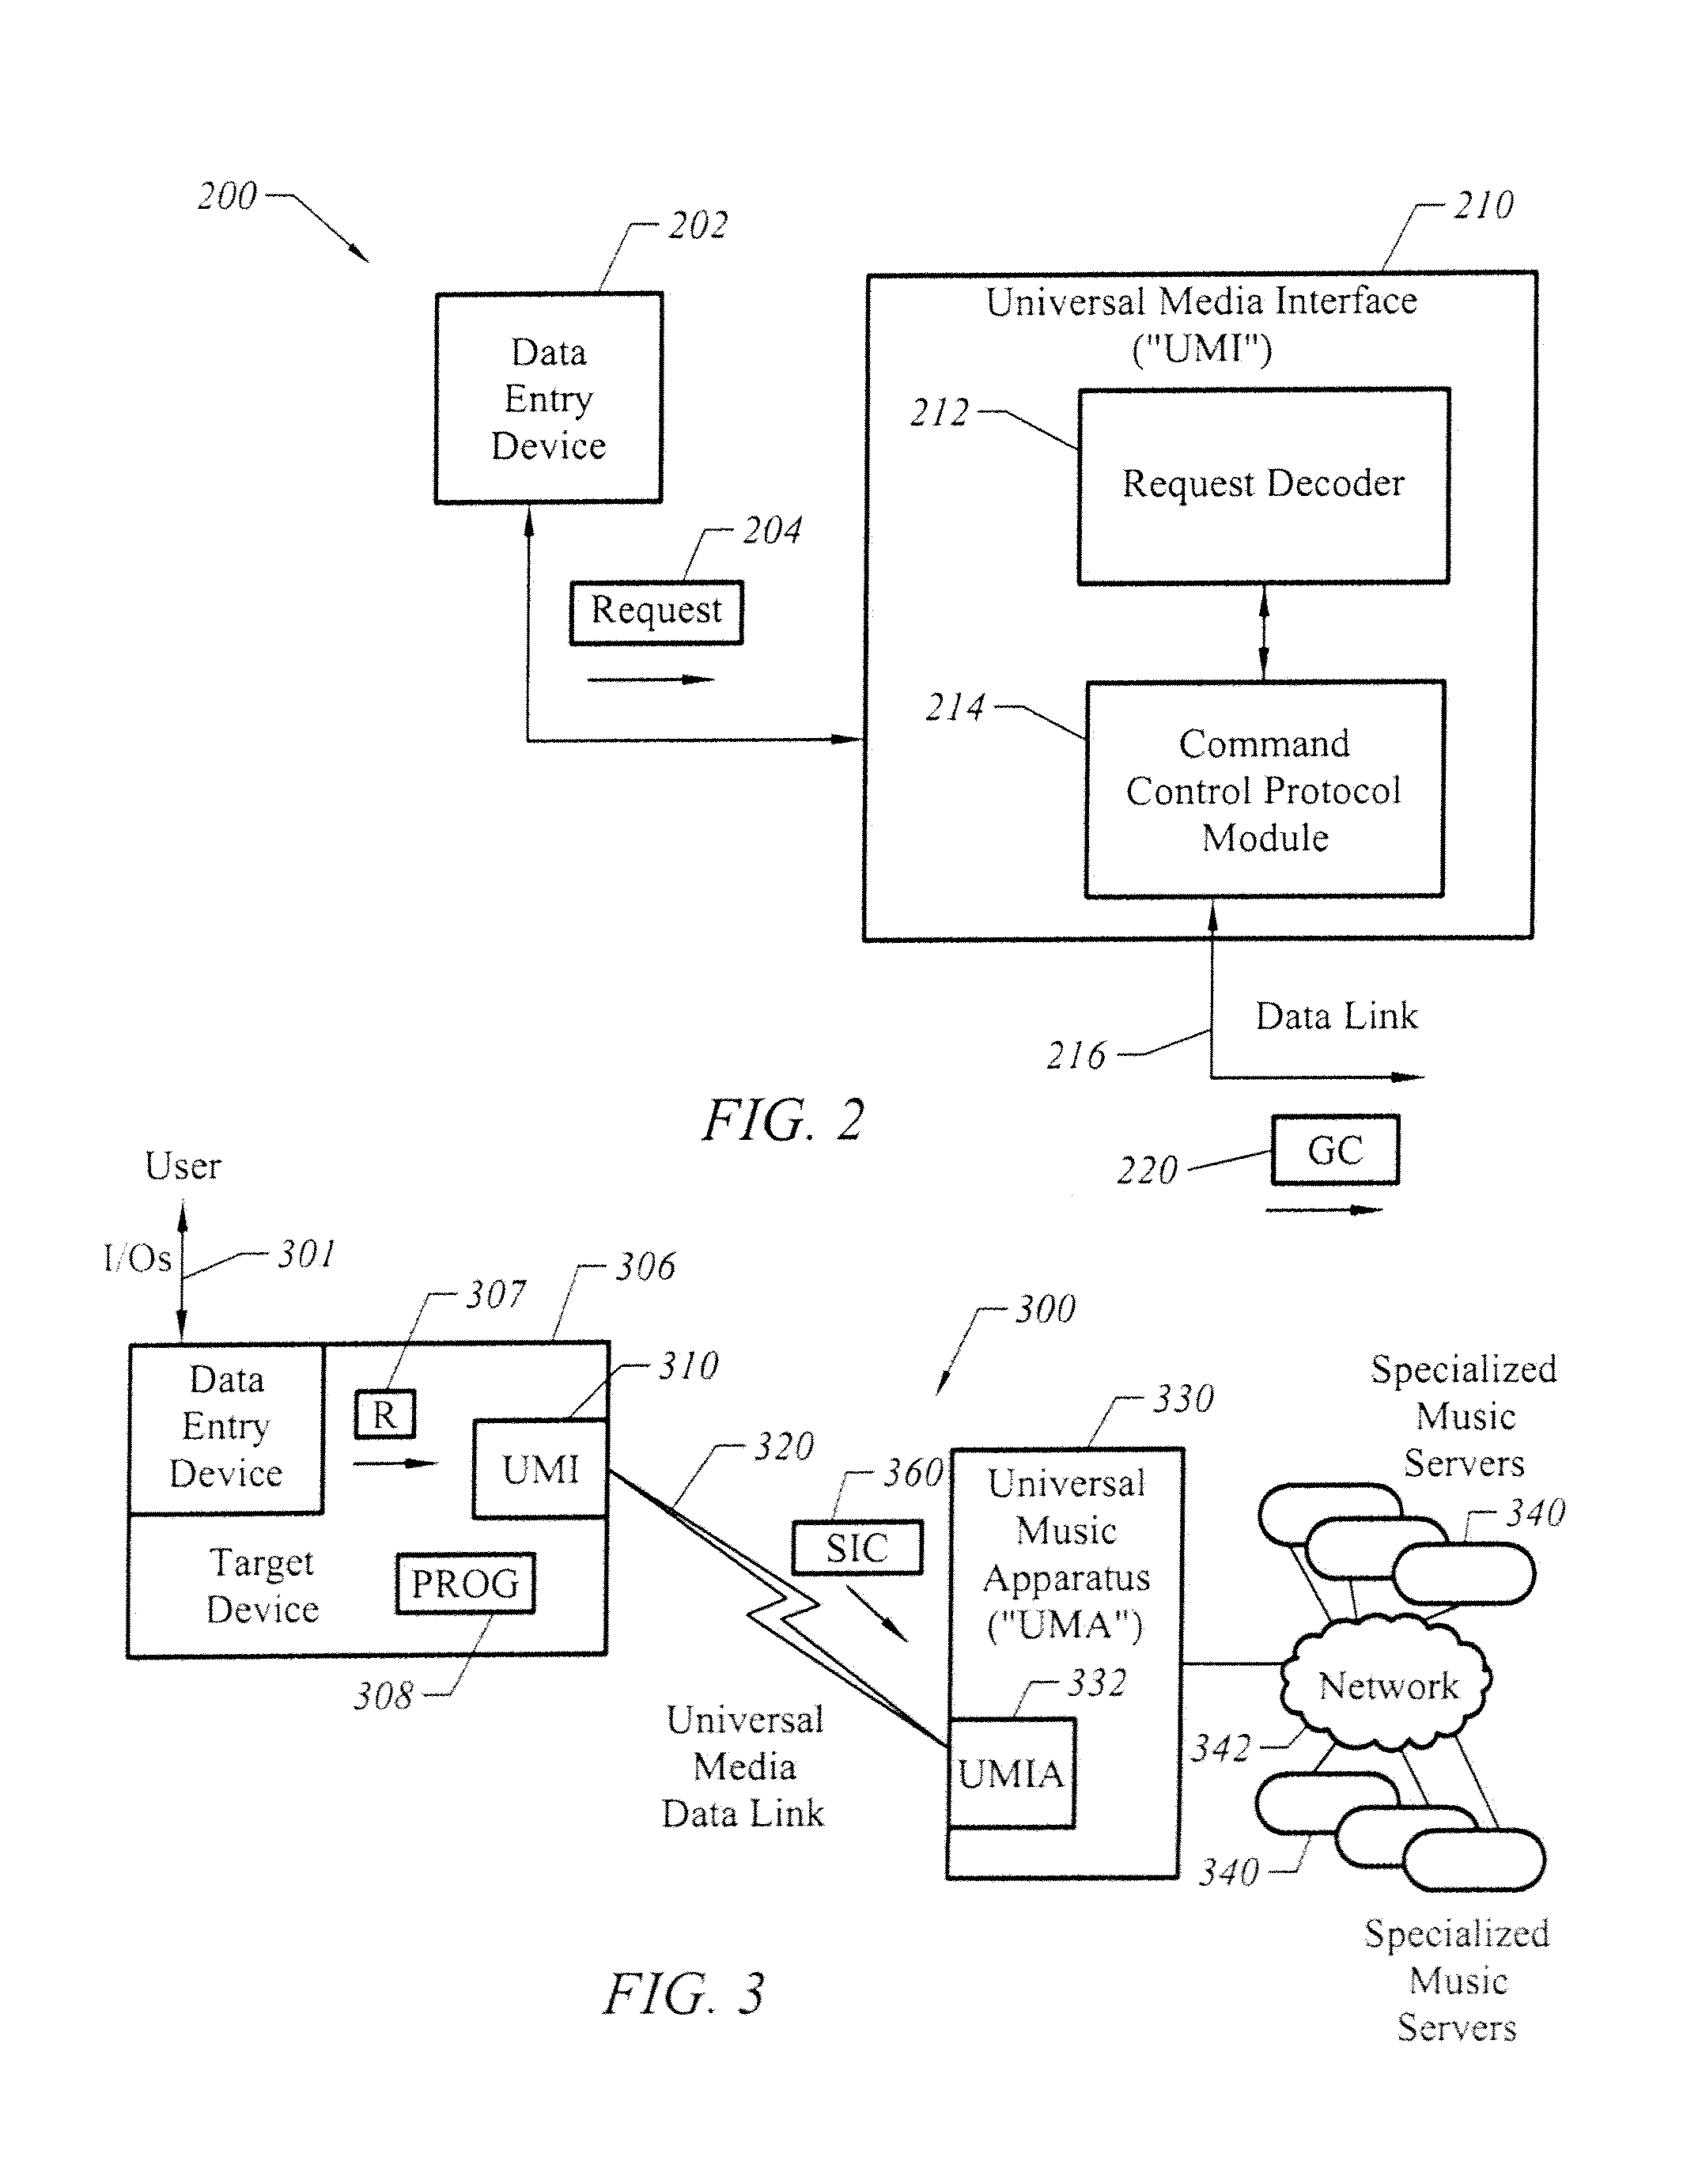 Method, apparatus, system and computer readable medium for providing a universal media interface to control a universal media apparatus